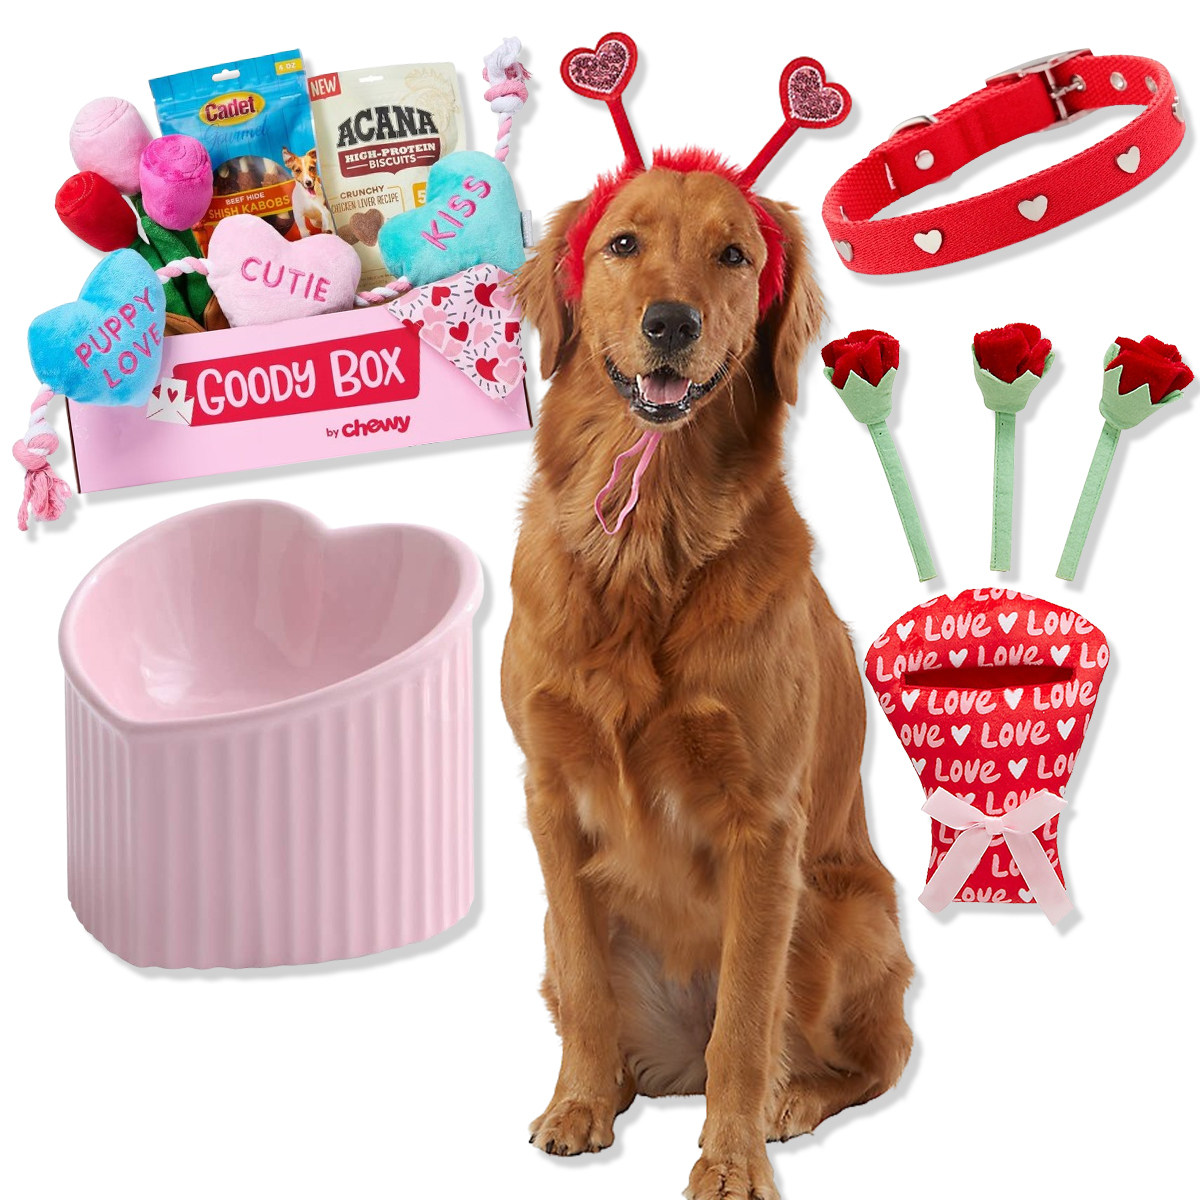 16 Valentine's Day gifts for pets and pet lovers